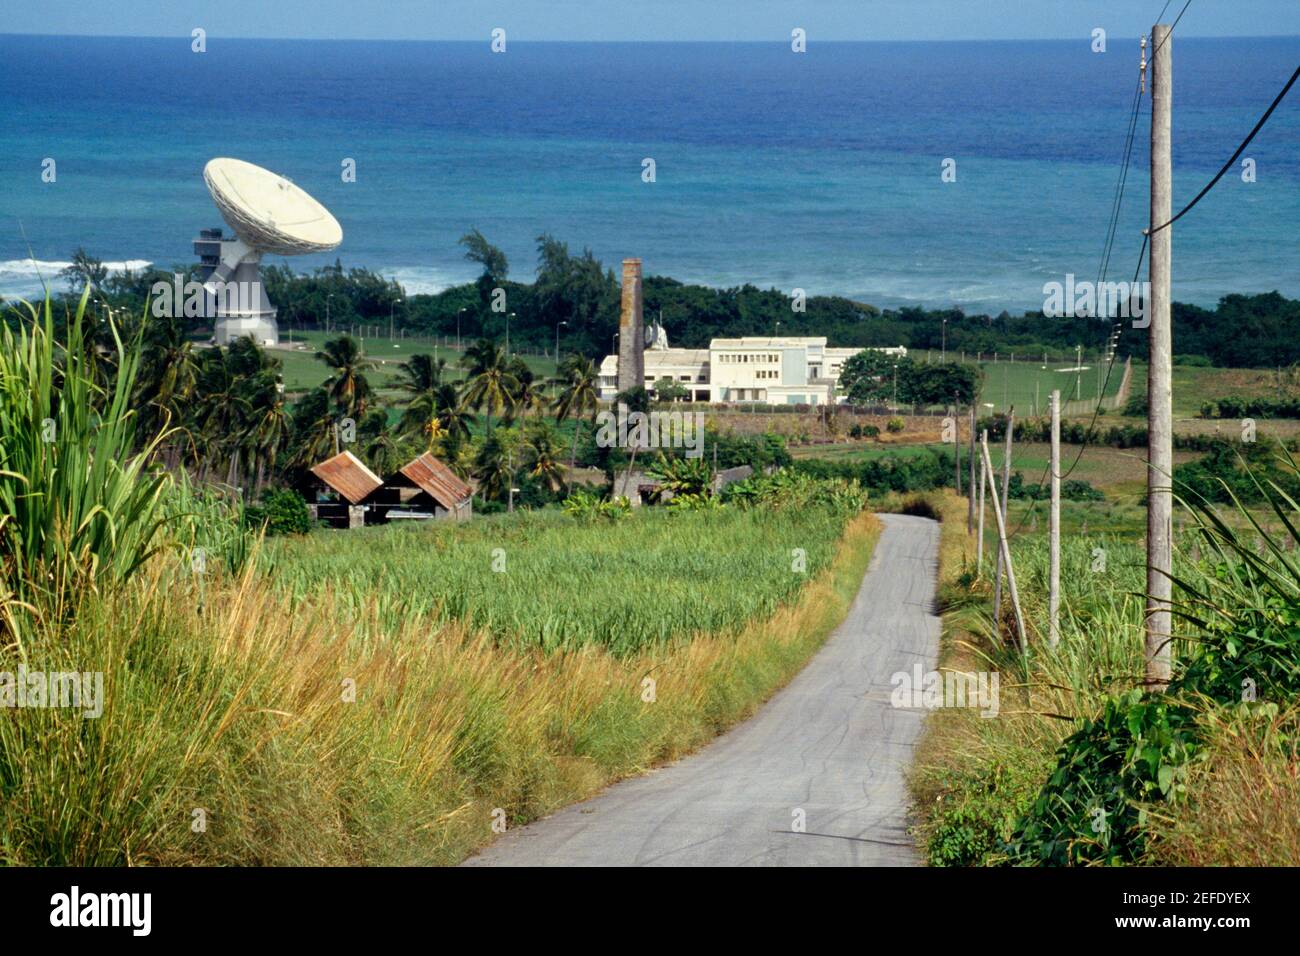 A road passing through lush meadows with a satellite dish at a side, Barbados, Caribbean Stock Photo